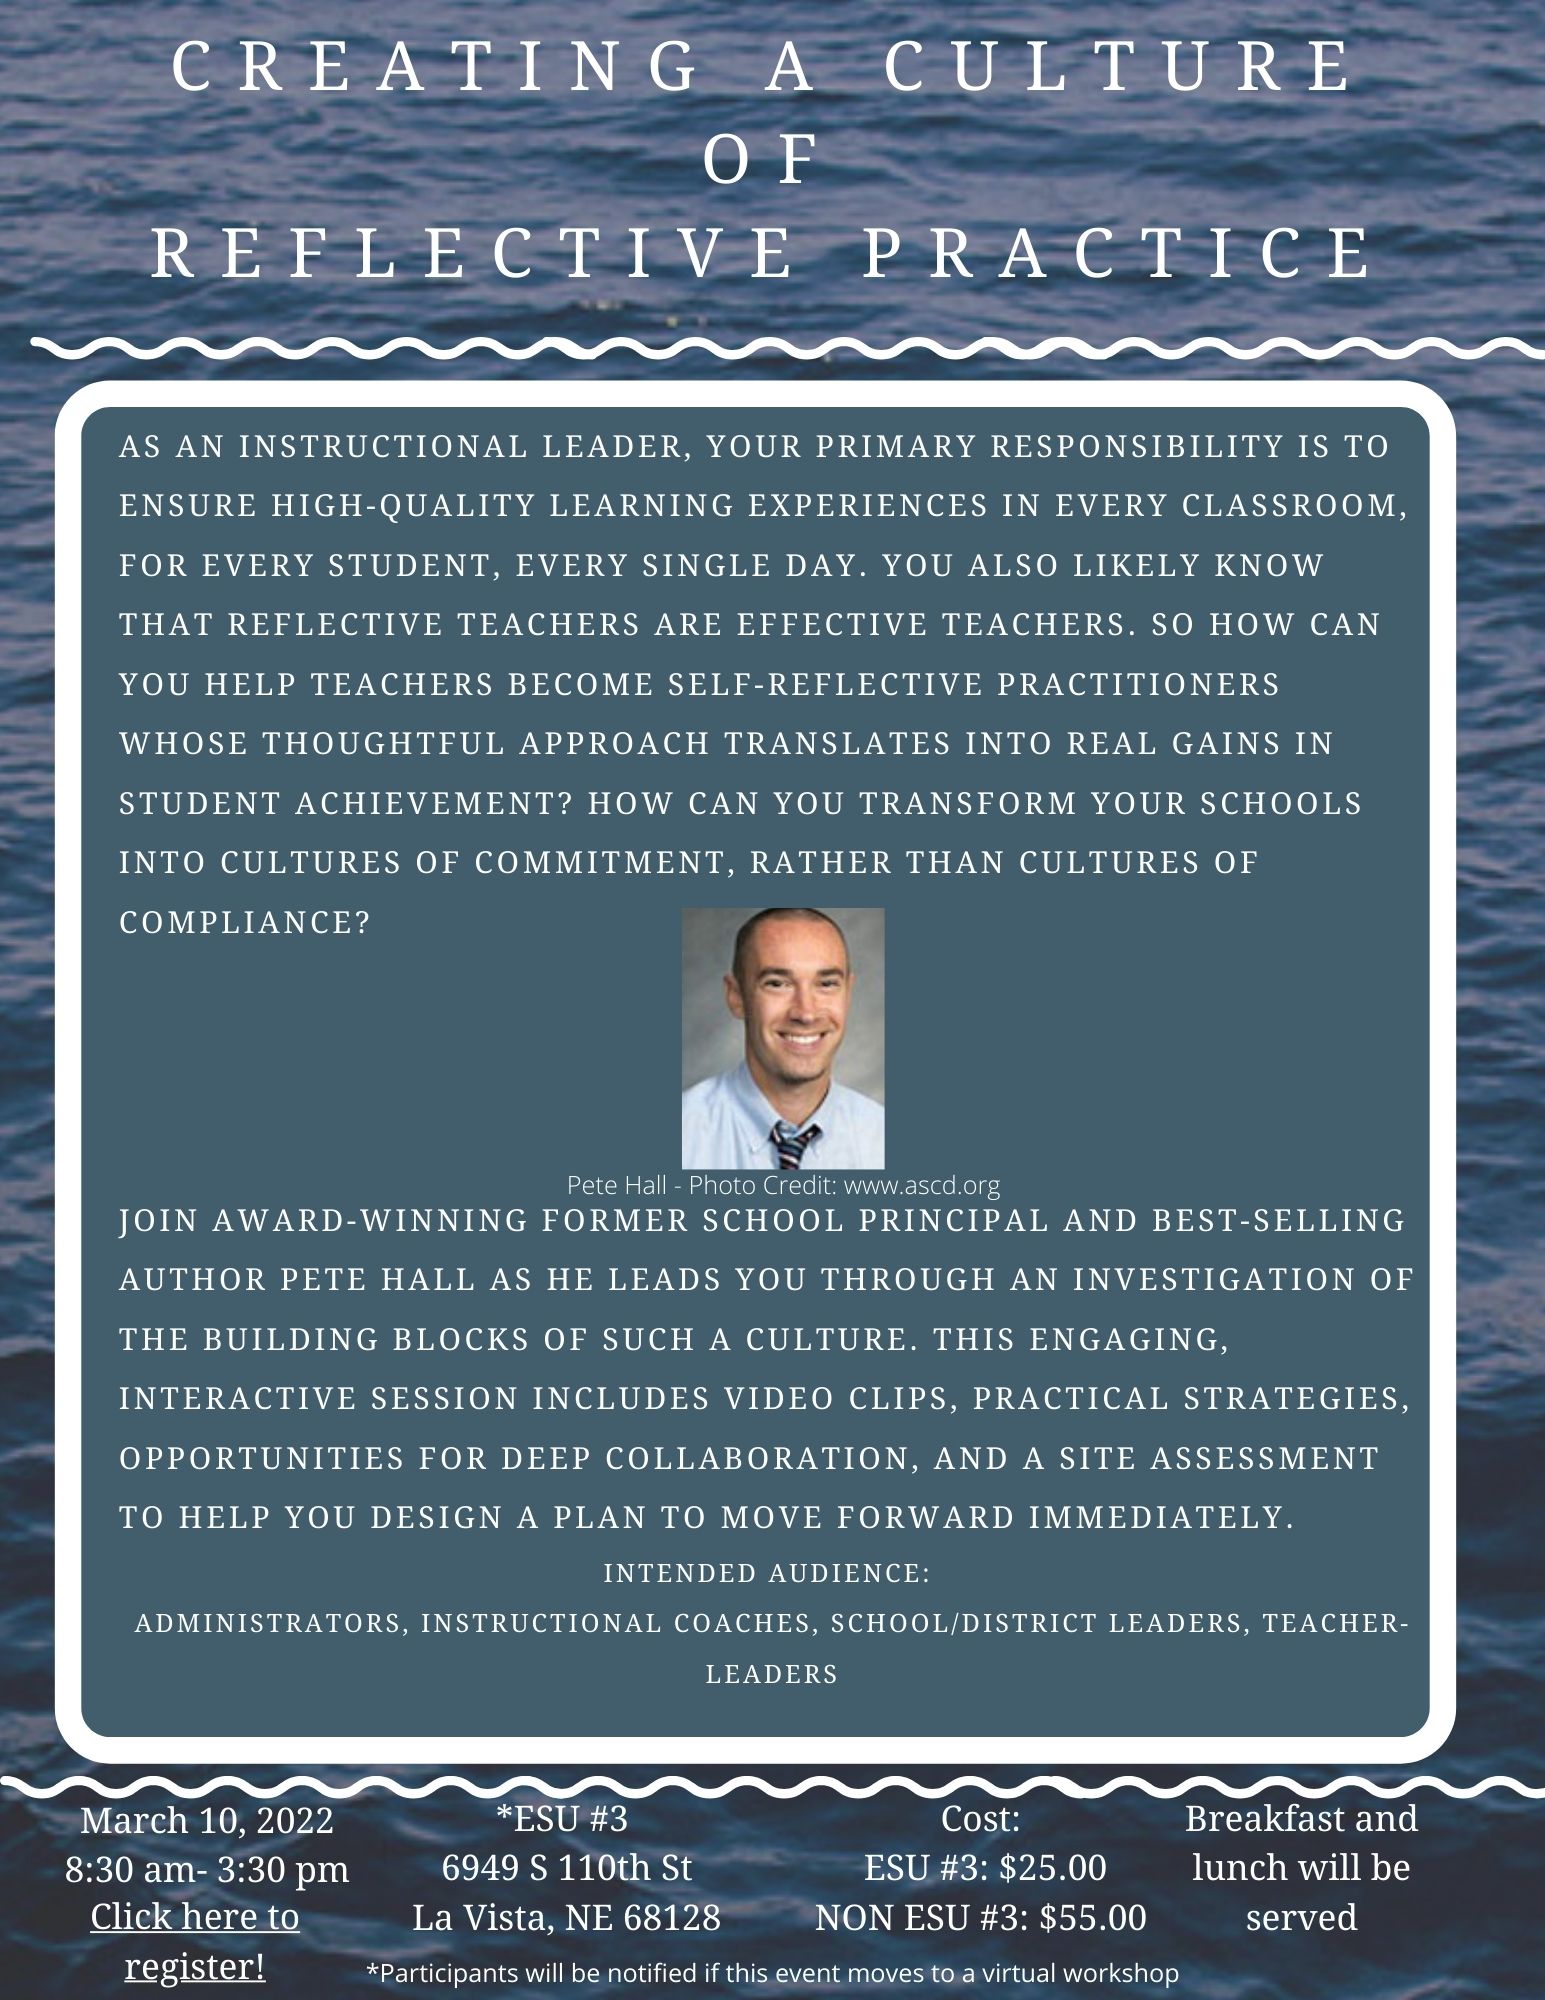 Click here to register for Creating a Culture of Reflective Practice on March 10, 2022 #19996